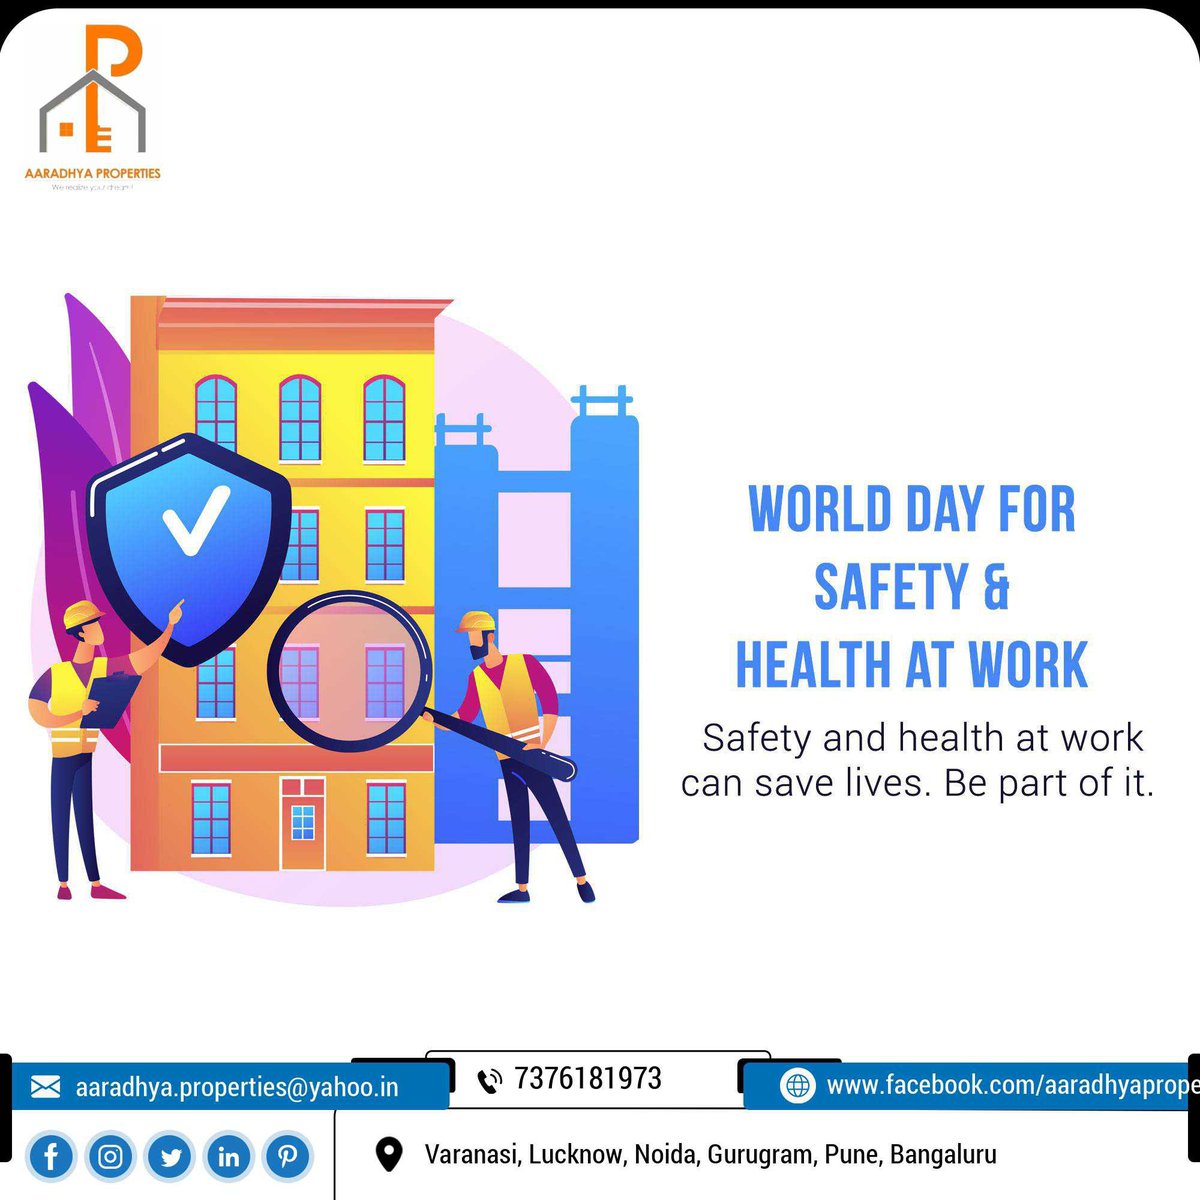 Greetings from Aaradhya Properties And Infrastructures for 'World day for safety & health at work'

#SafeAndHealthyWorkingEnvironment #SafeWorkers #SafetyCulture #OccupationalSafety #HealthyBusiness #SafeAndHealthyWork #WorkplaceHealth